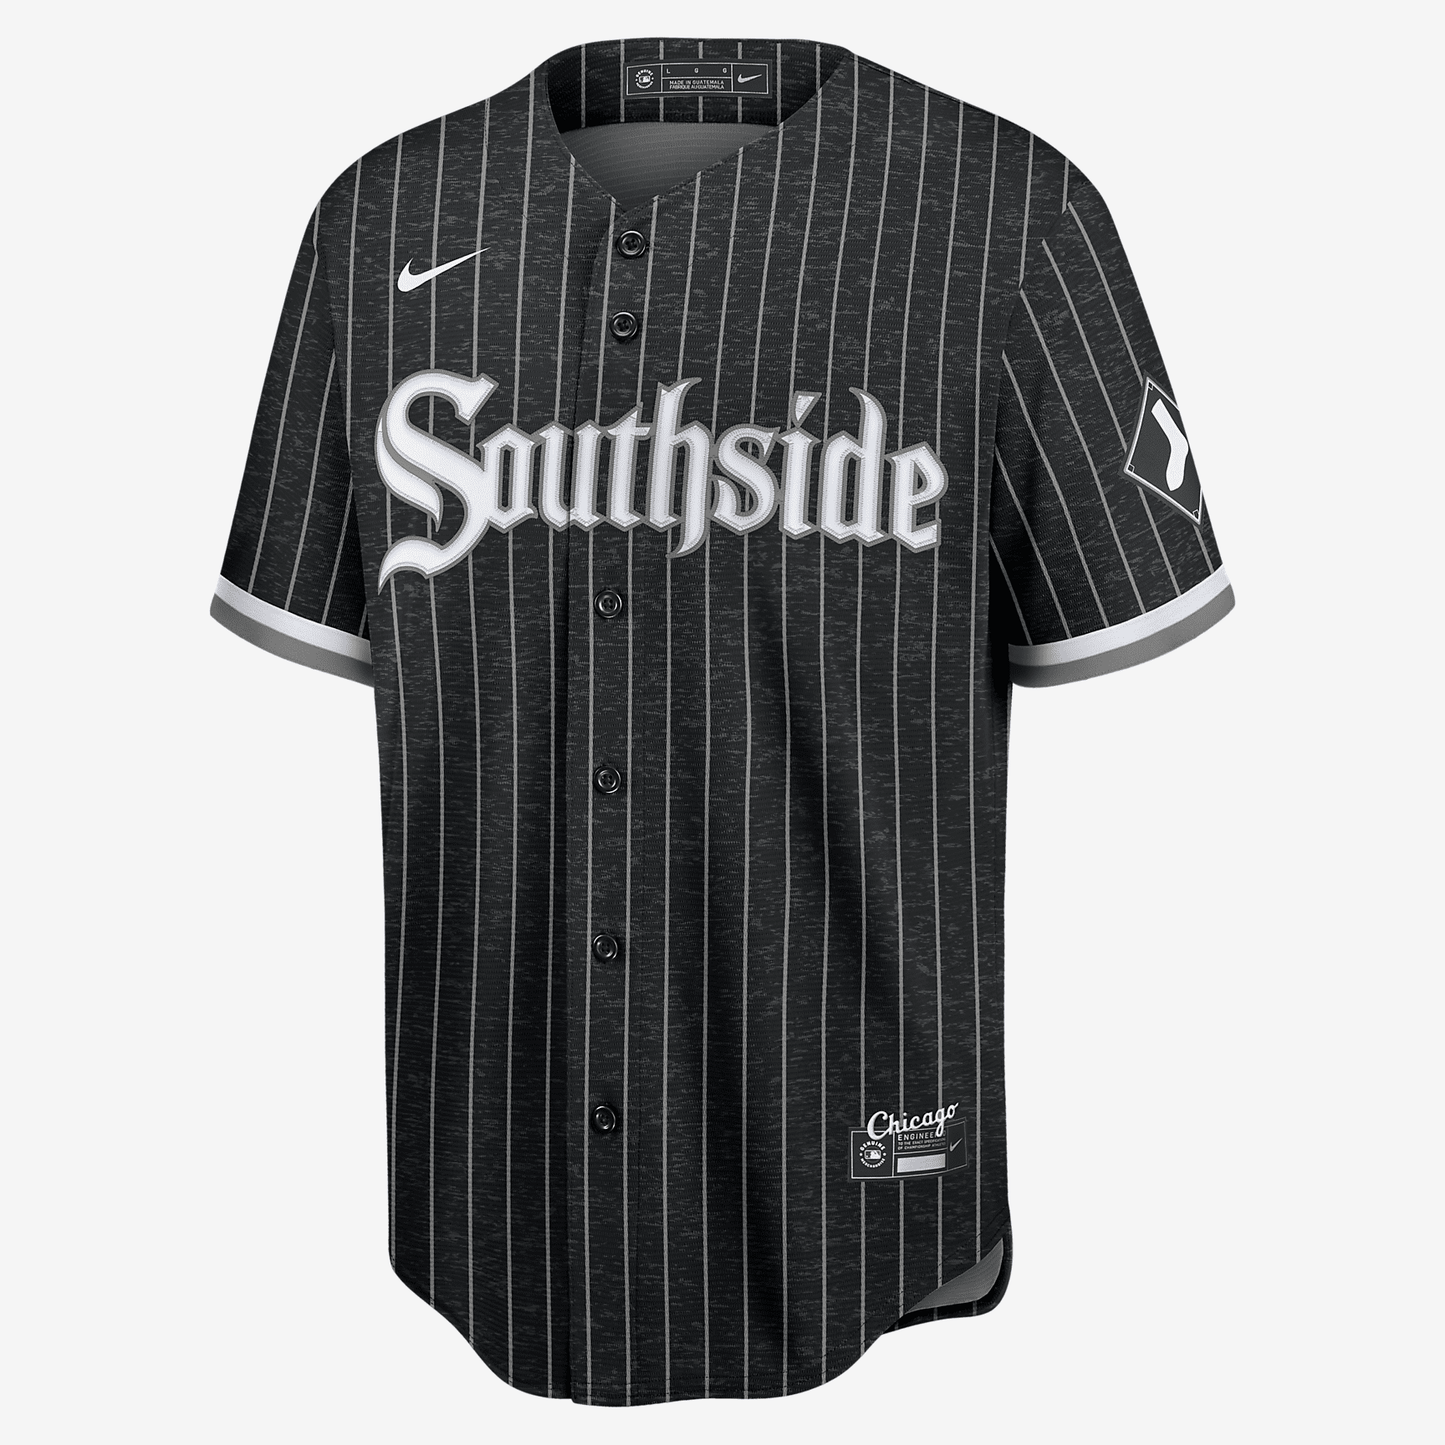 MLB Chicago White Sox City Connect (Tim Anderson) Men's Replica Baseball Jersey - Black/Anthracite